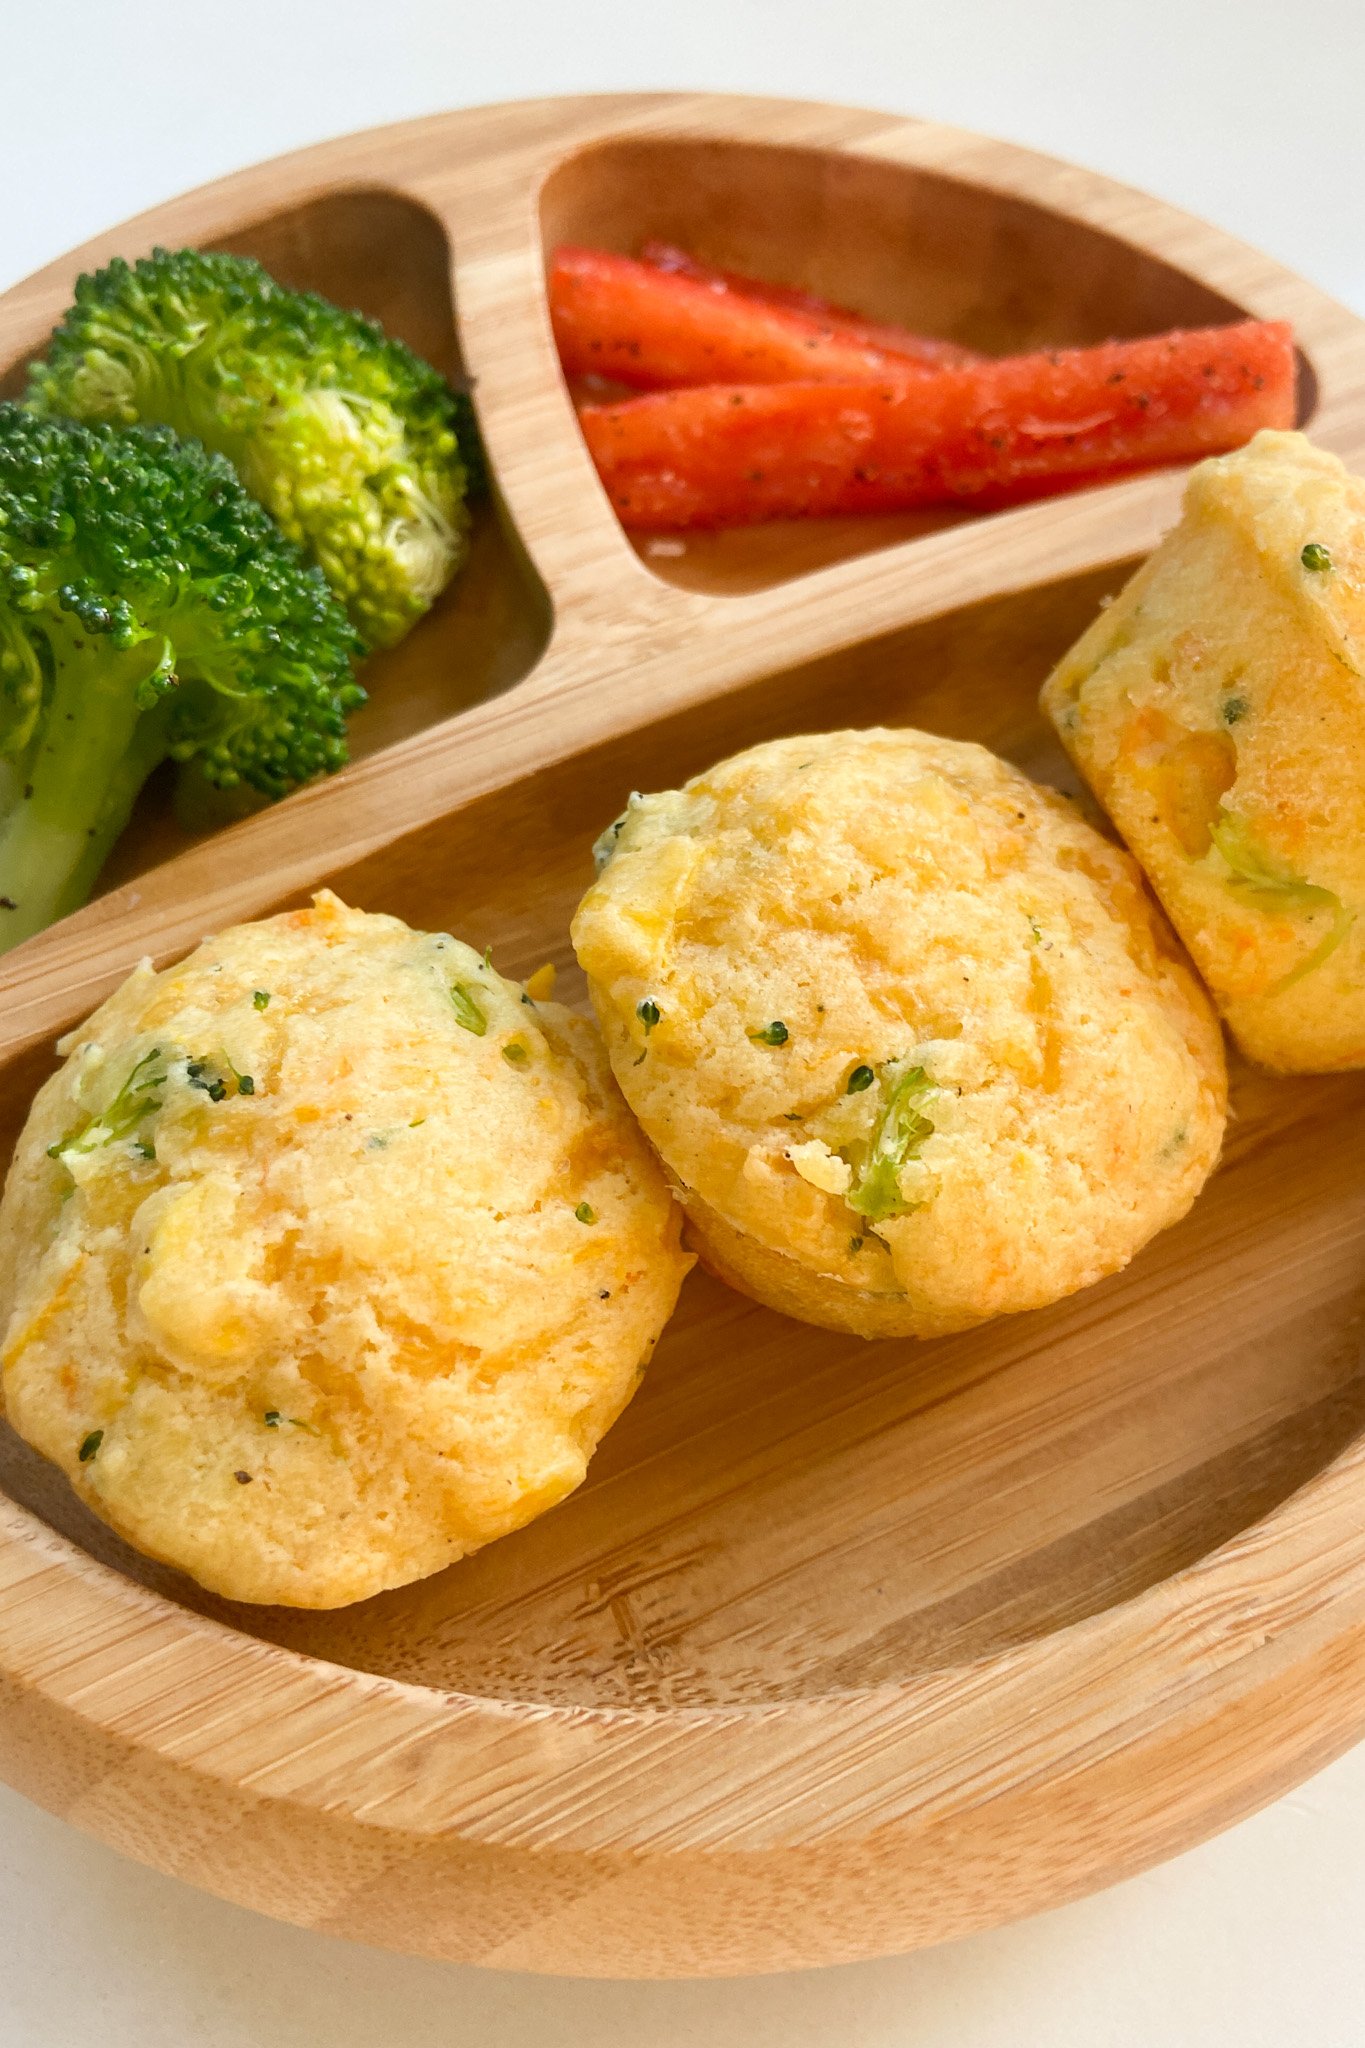 Veggie-muffins served with broccoli and red bell pepper